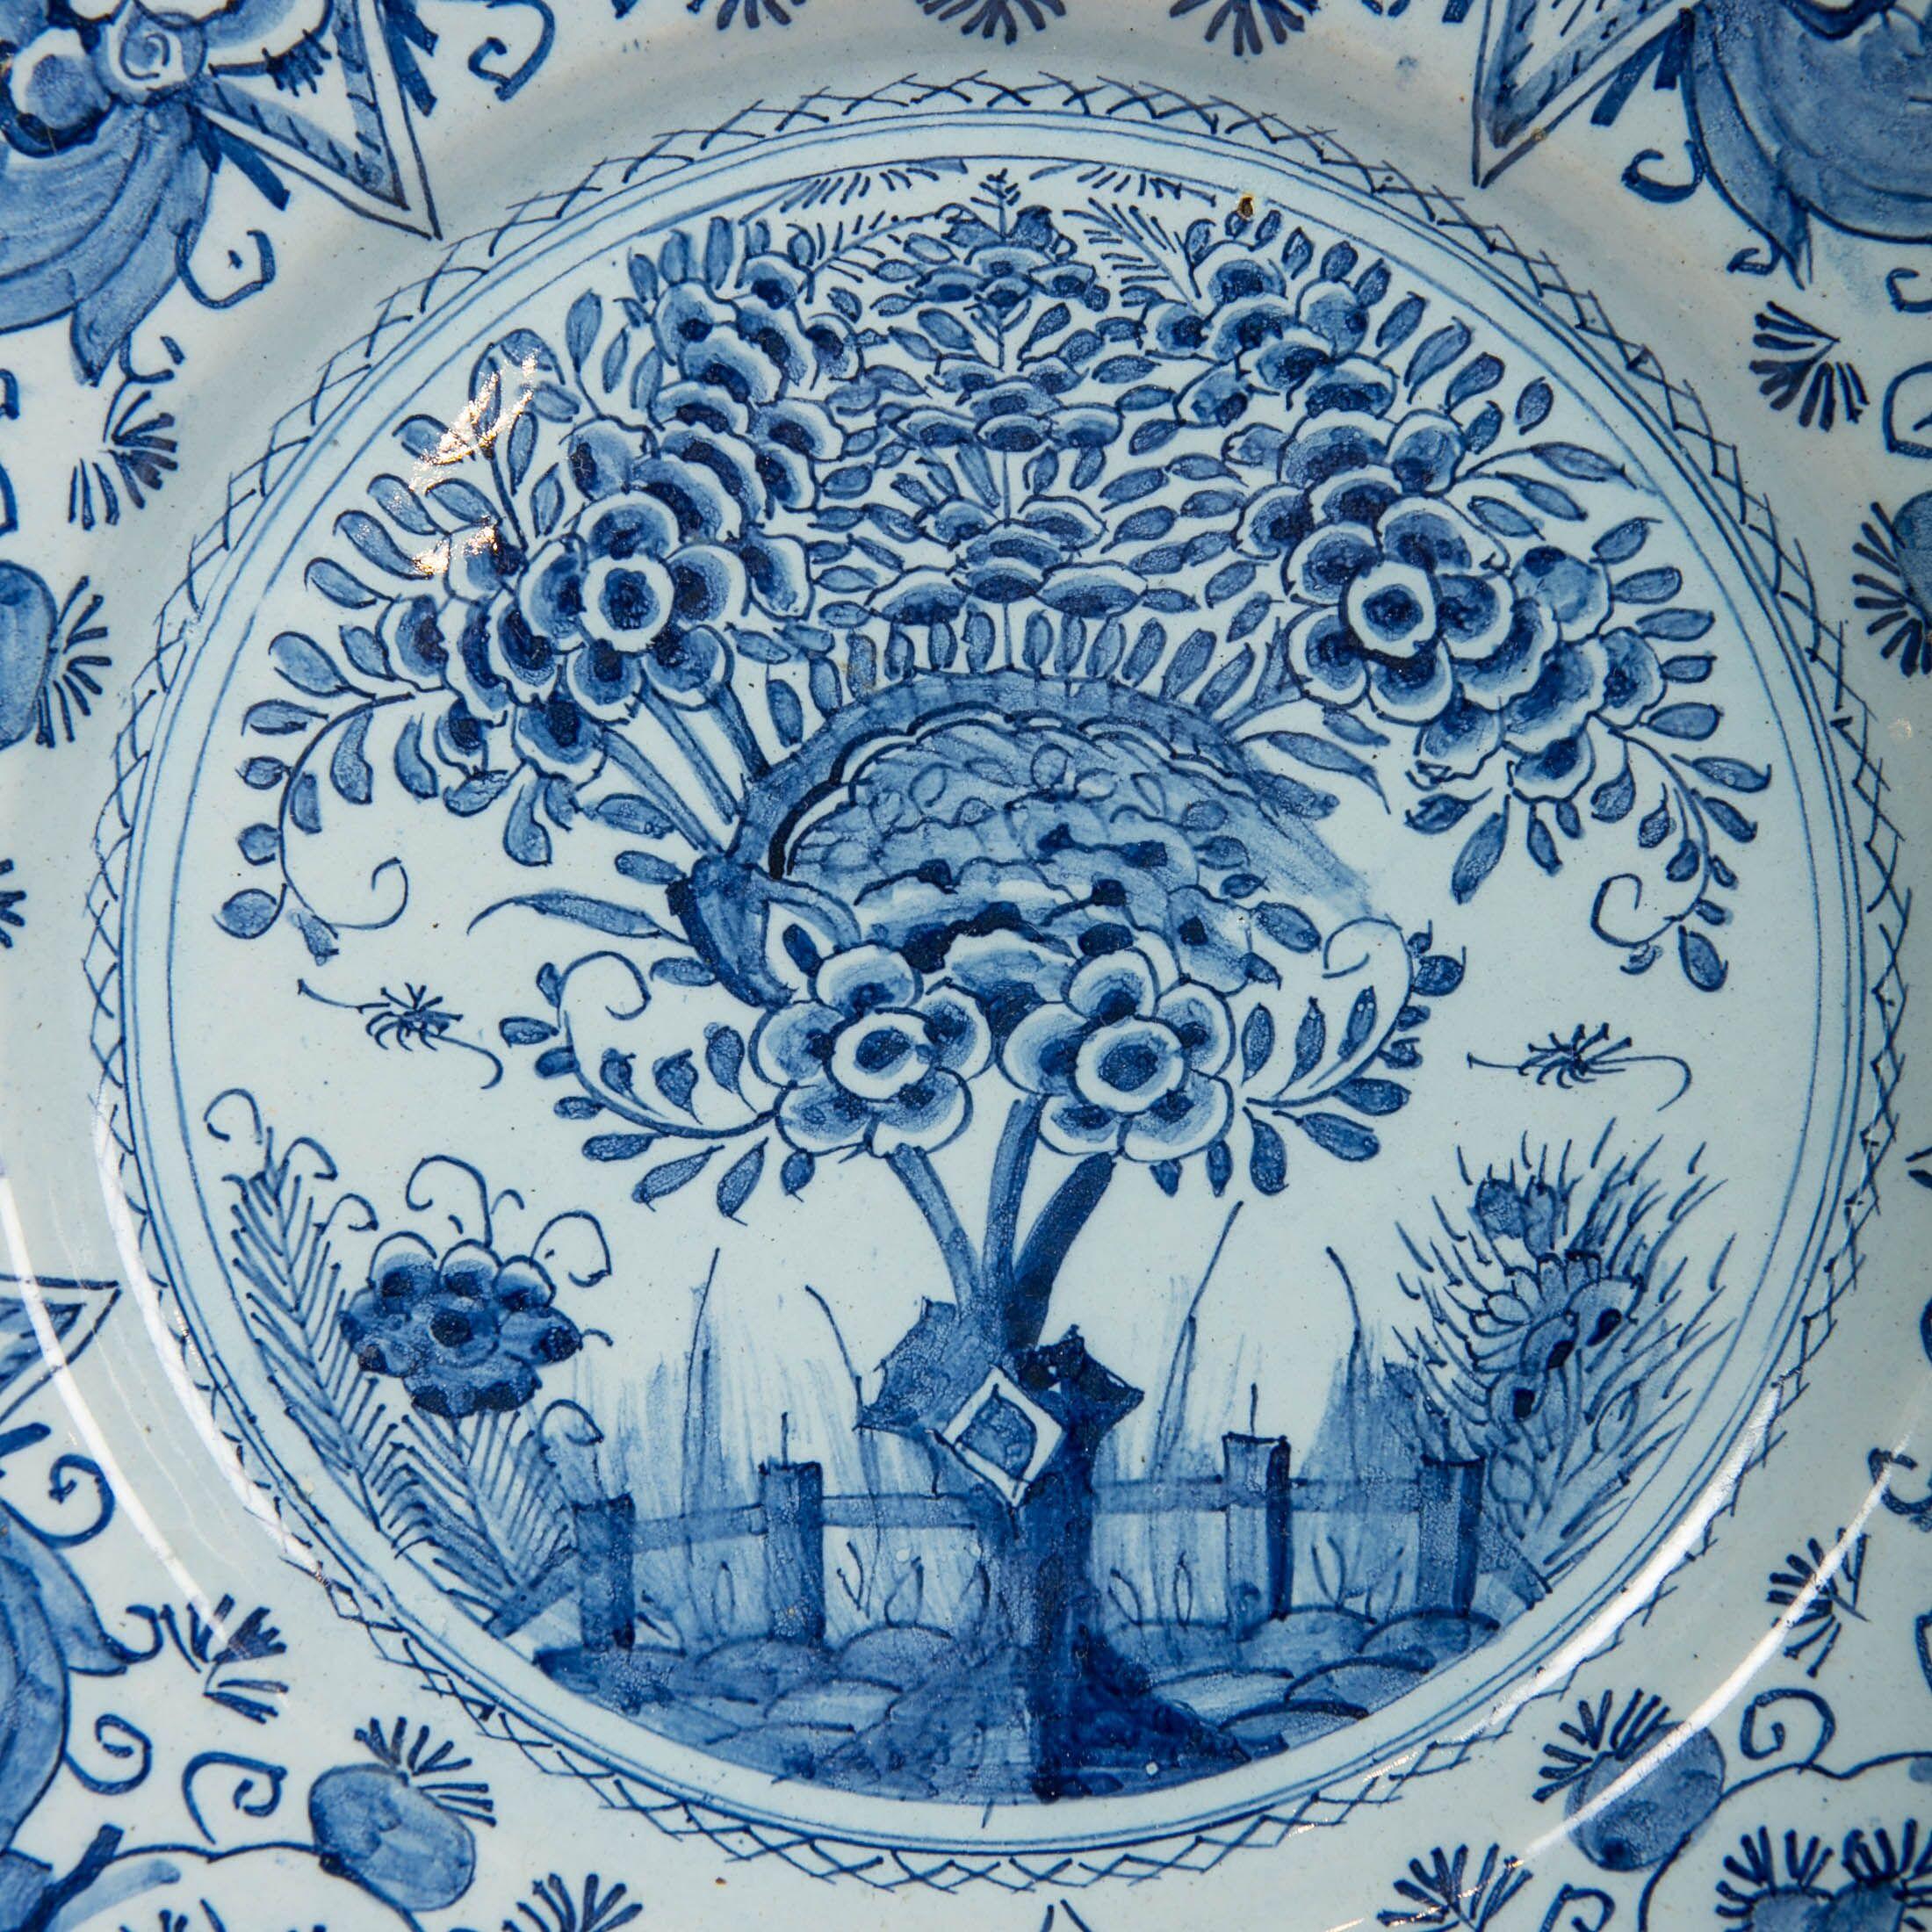 A Dutch Delft blue and white charger hand-painted showing a flowering tree in a fenced garden. Grasses, a single large flower, and insects are shown behind the fence. This design is contained within a circle formed by a chain of small crossed X's.